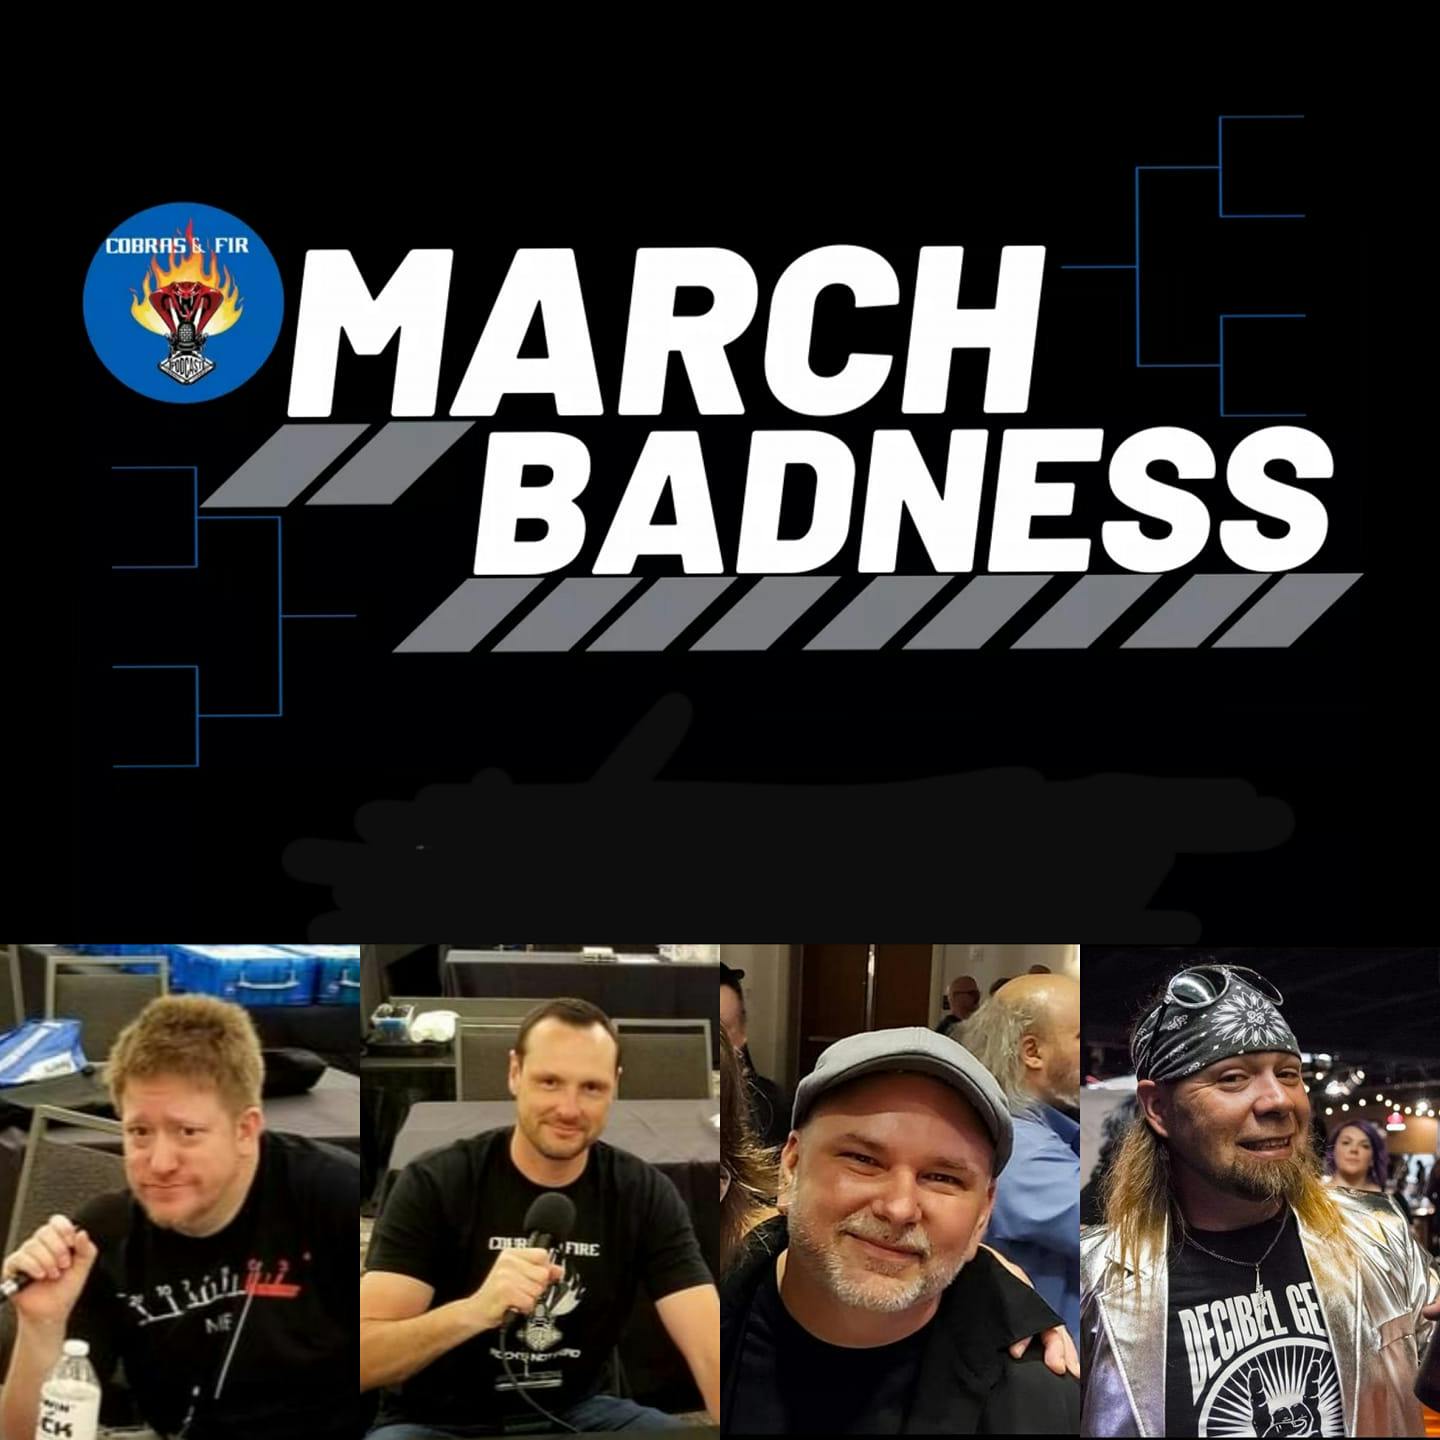 Cobras & Fire Podcast: March Badness Round Three Results Show